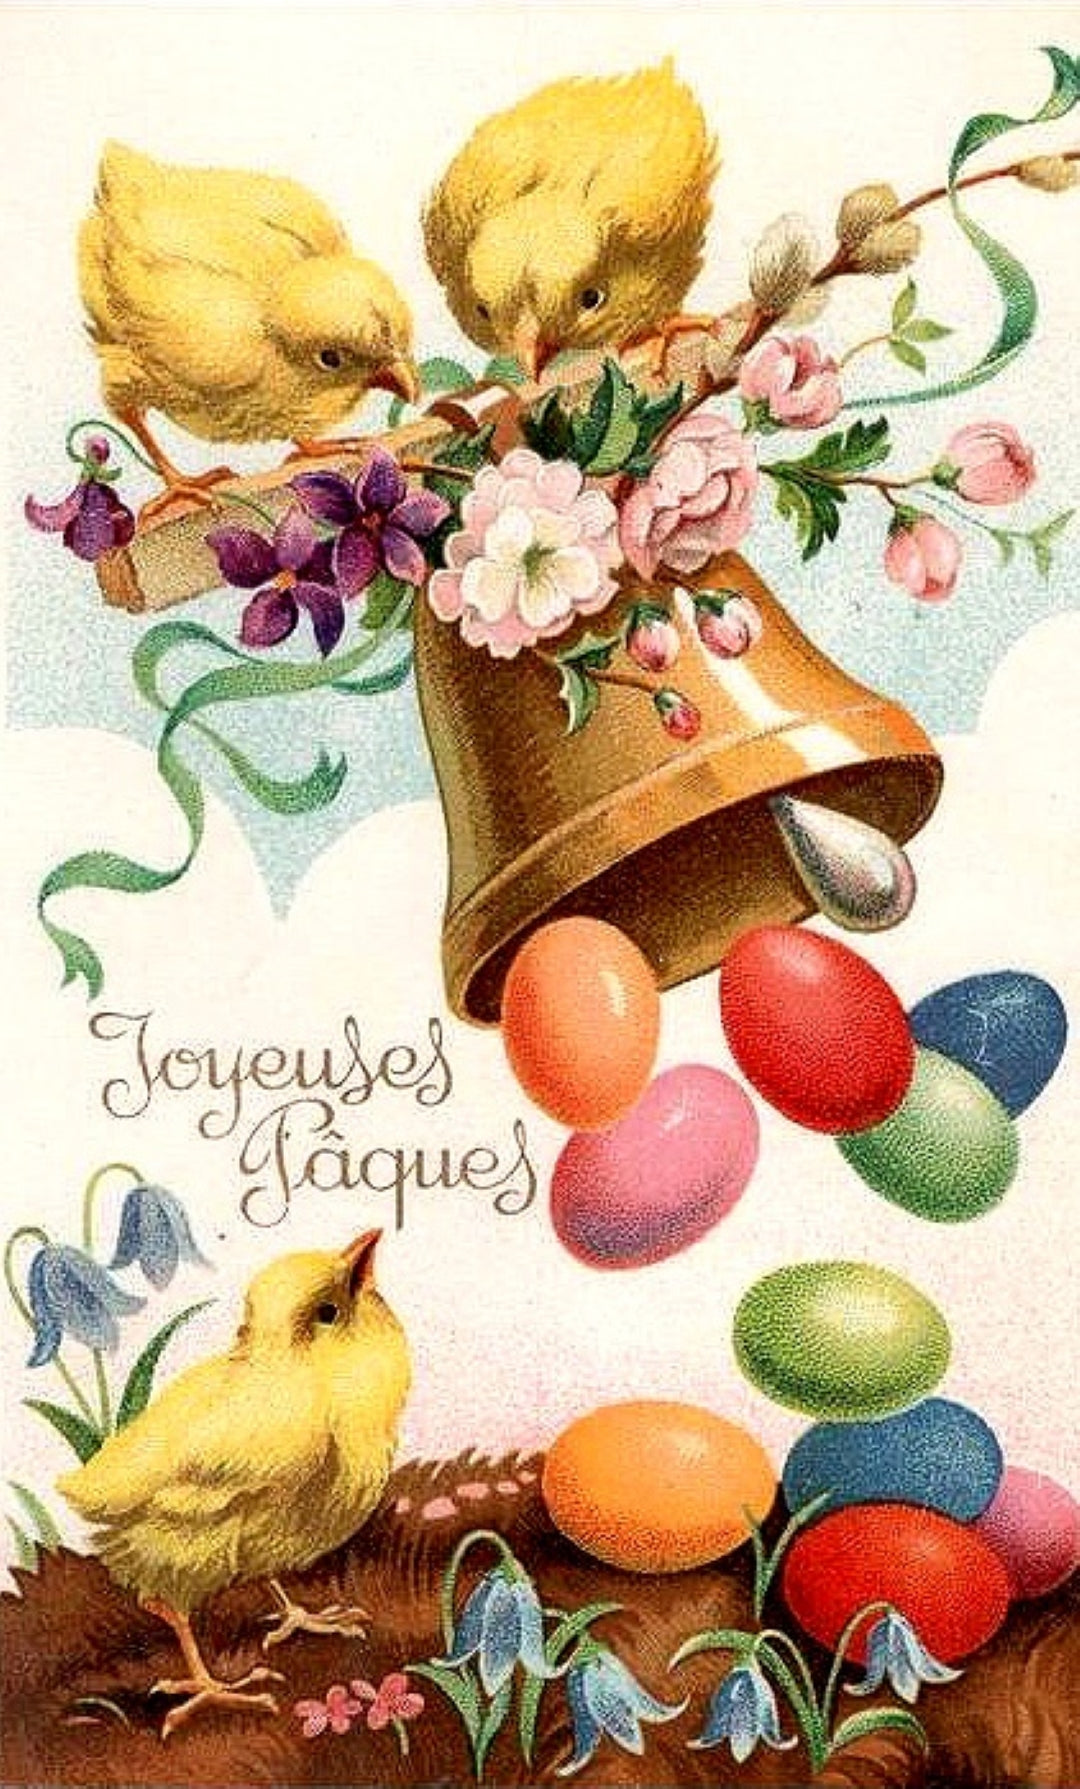 Happy Easter!  Curious Times